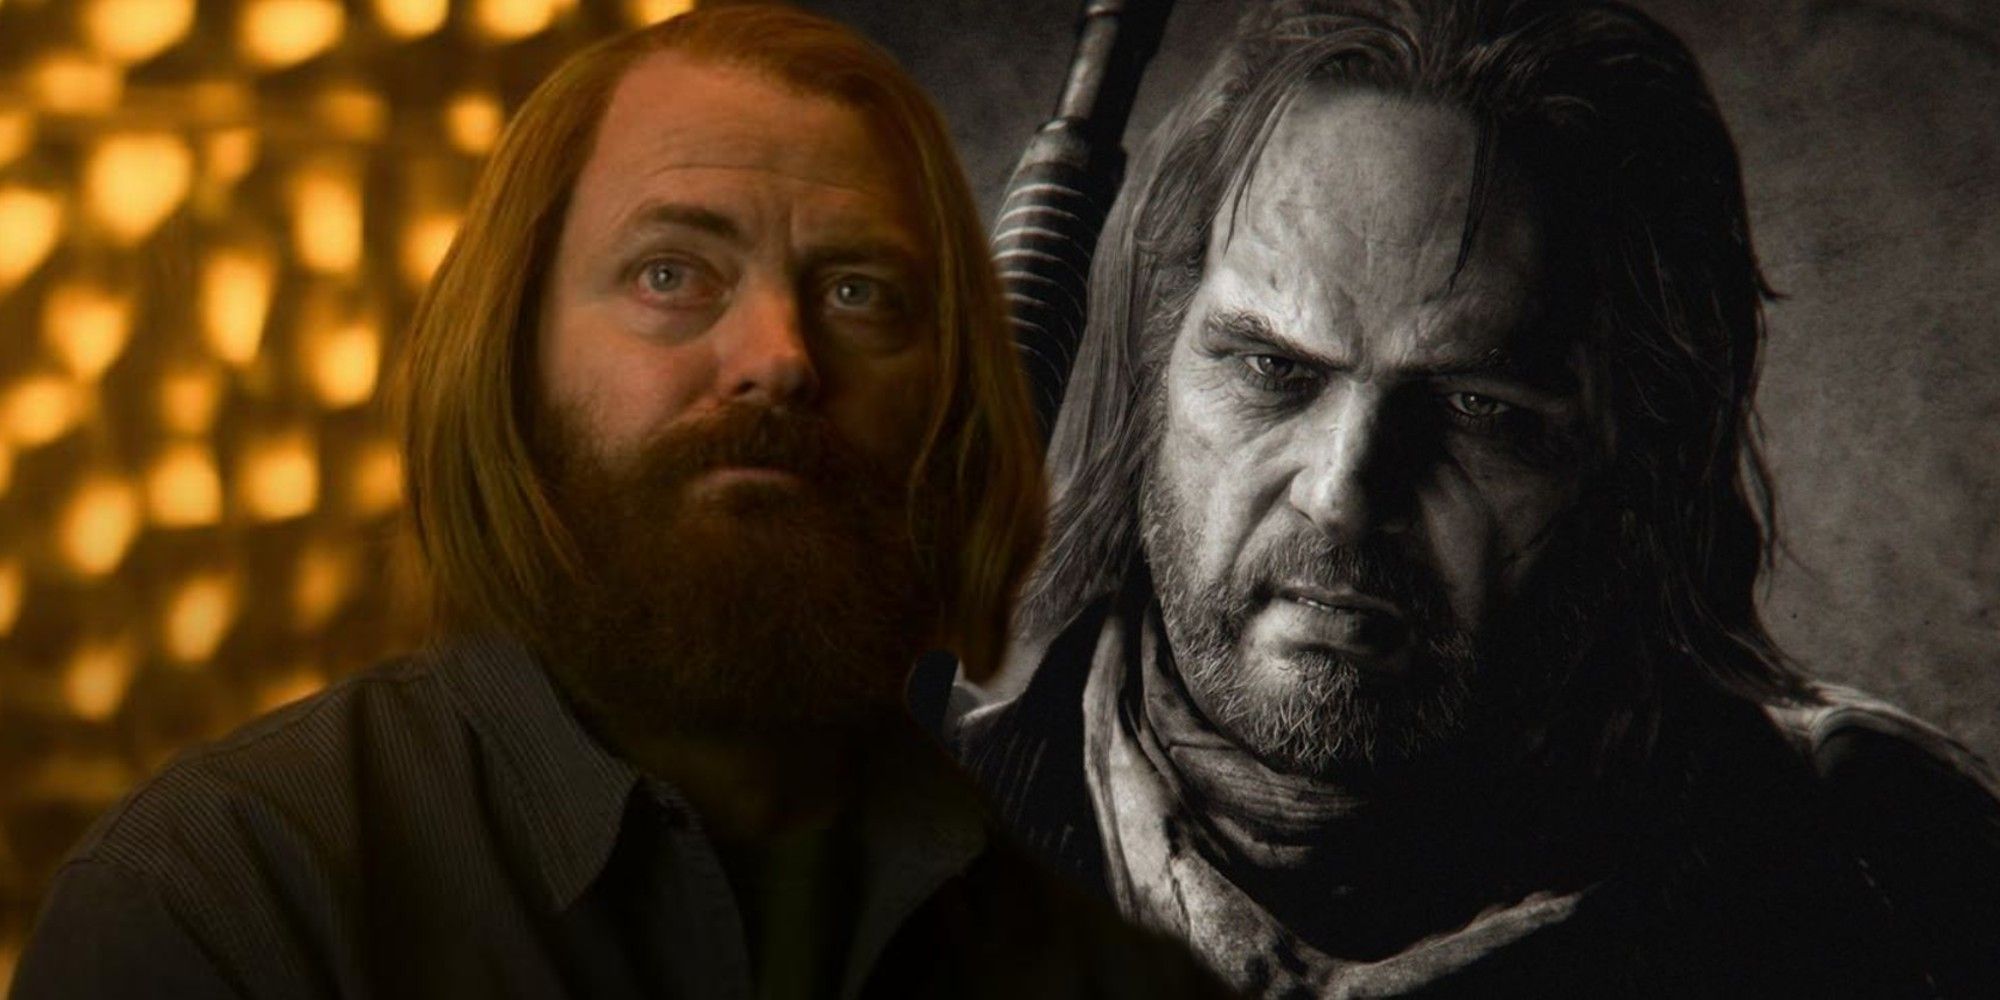 The Last of Us’ Nick Offerman Casting Makes Sense (But It’s Problematic)